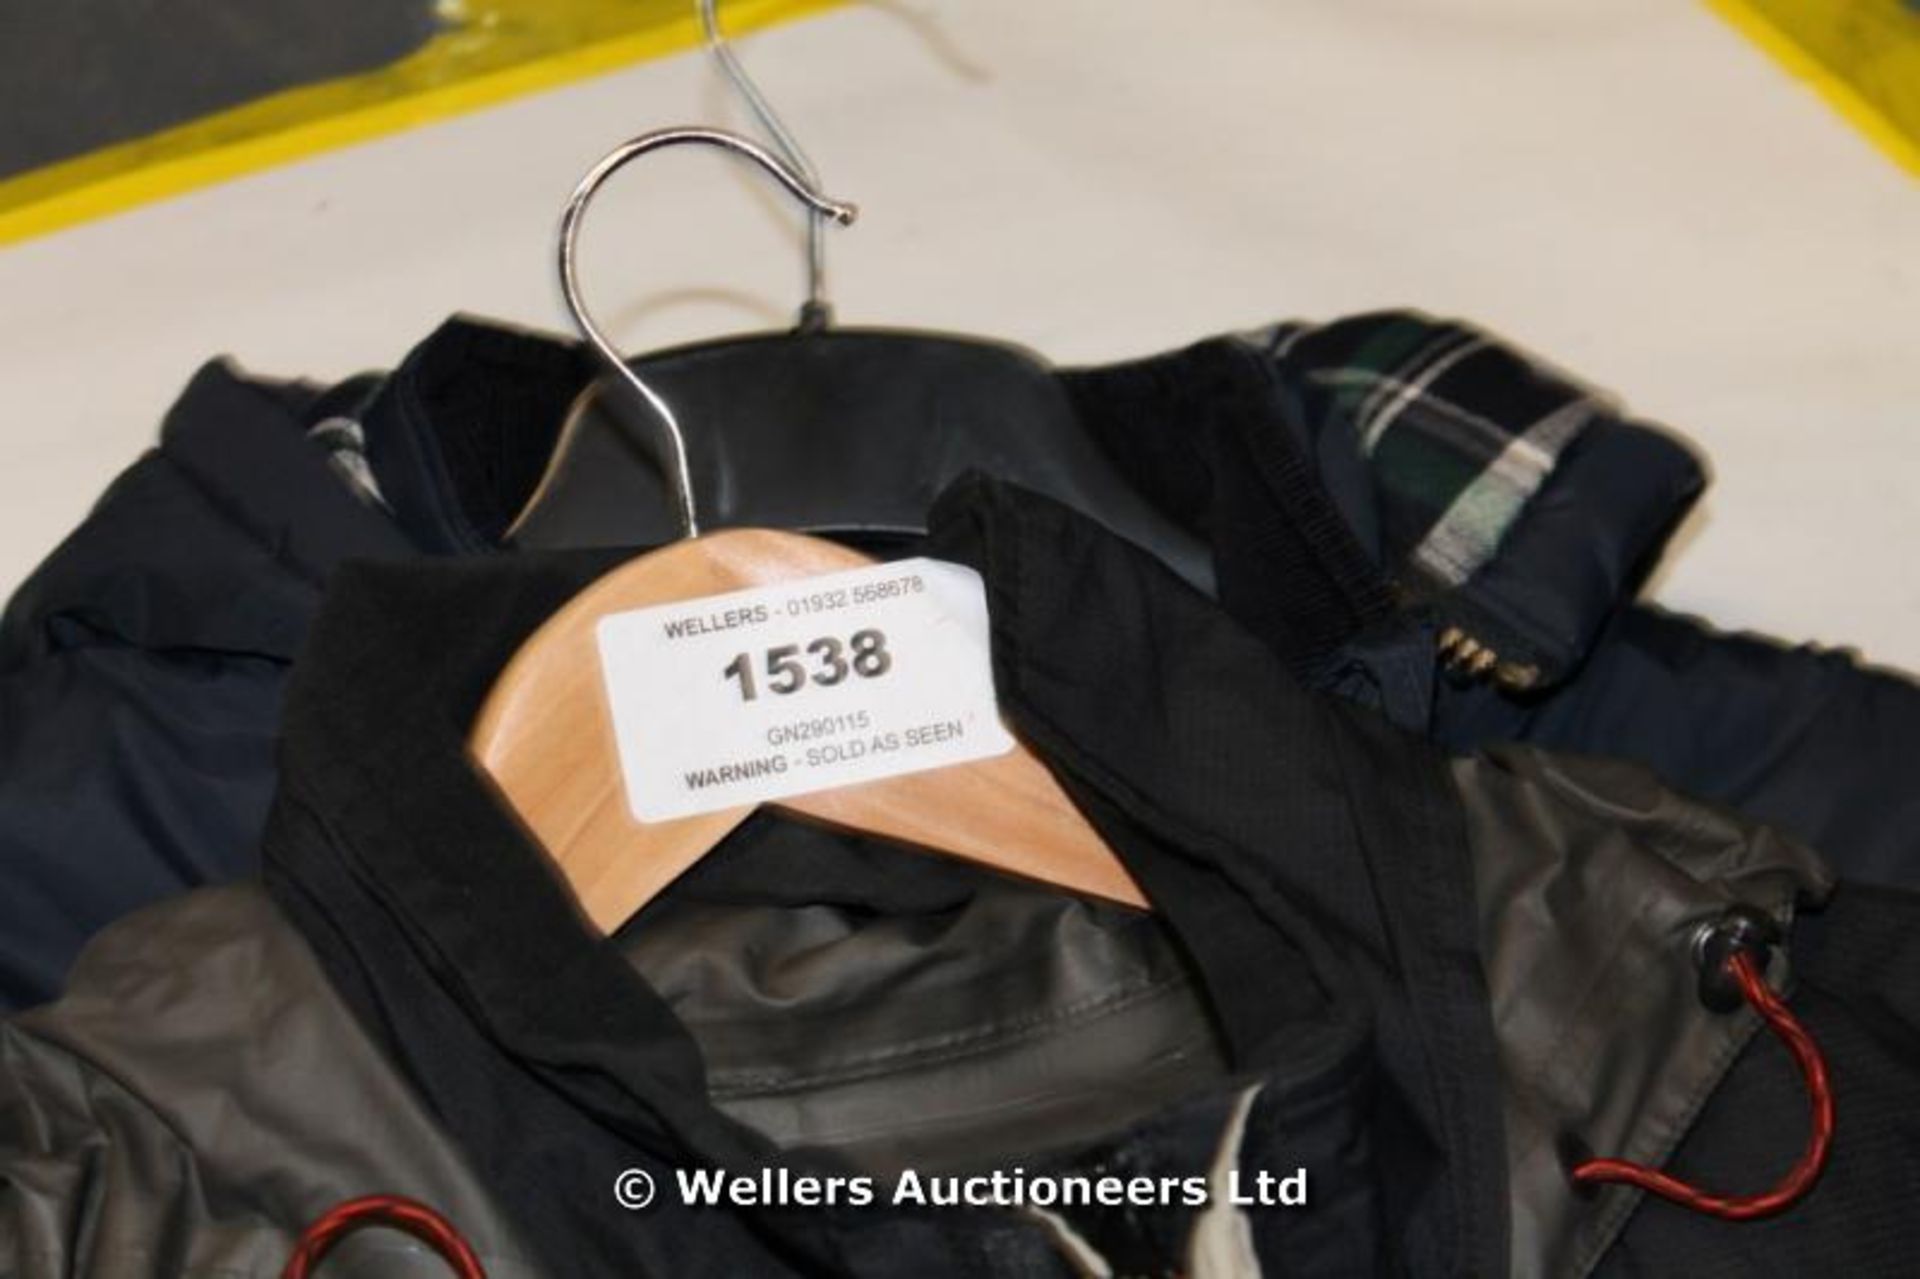 *LOT OF 2 JACKETS BERGHAUS AND APARELL / GRADE: UNCLAIMED PROPERTY (DC2)[GN290115-1538}